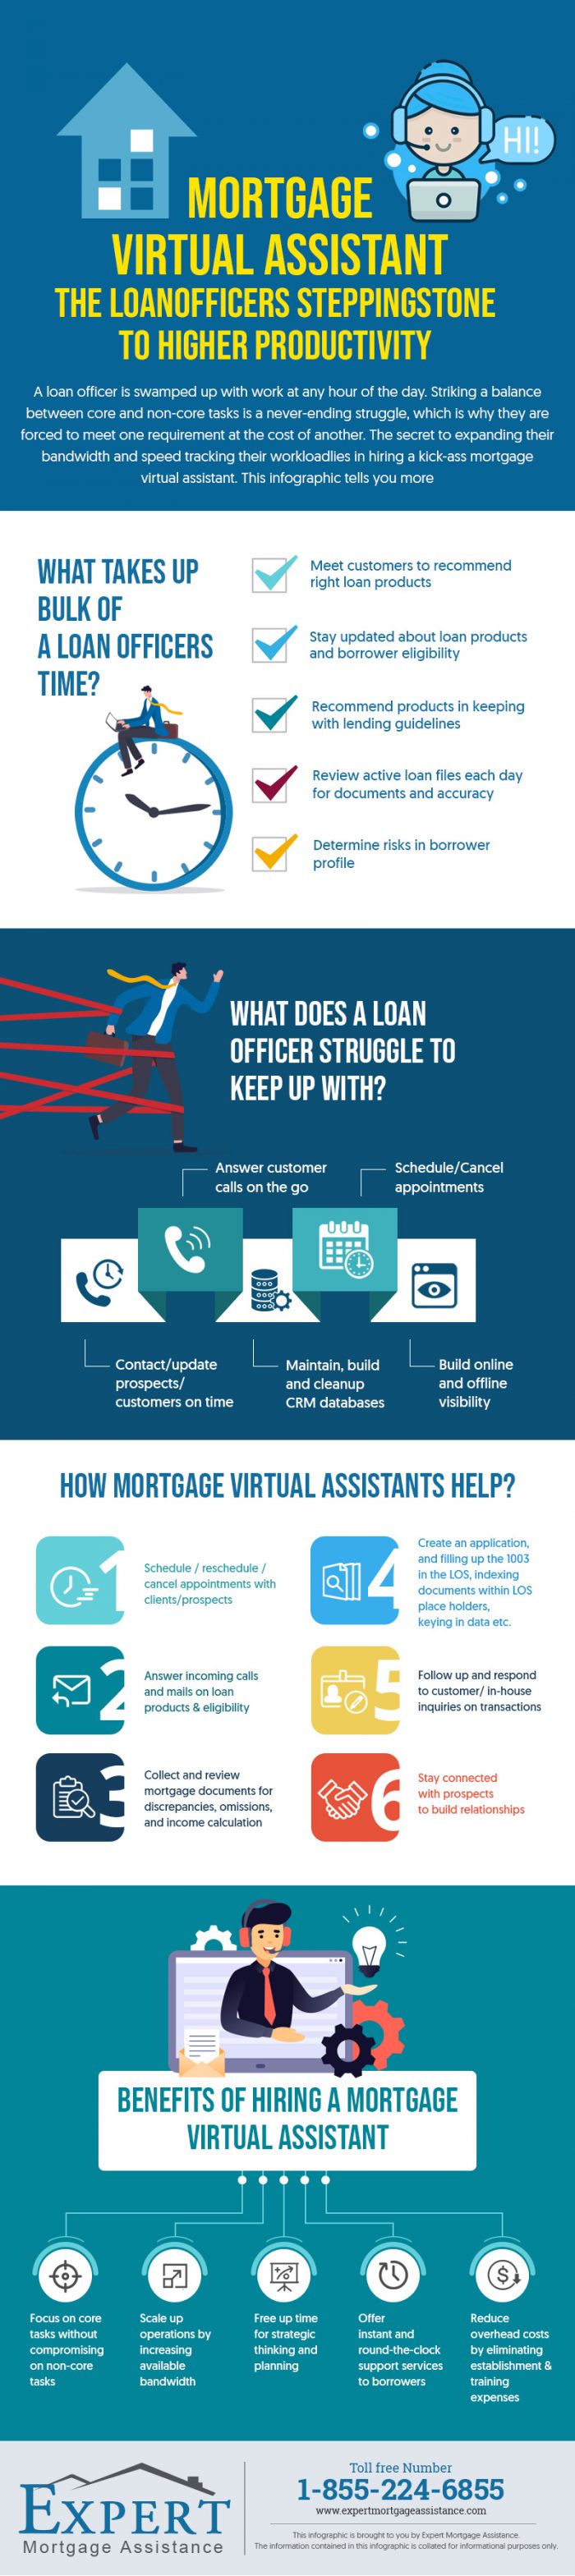 mortgage virtual assistant infographic.